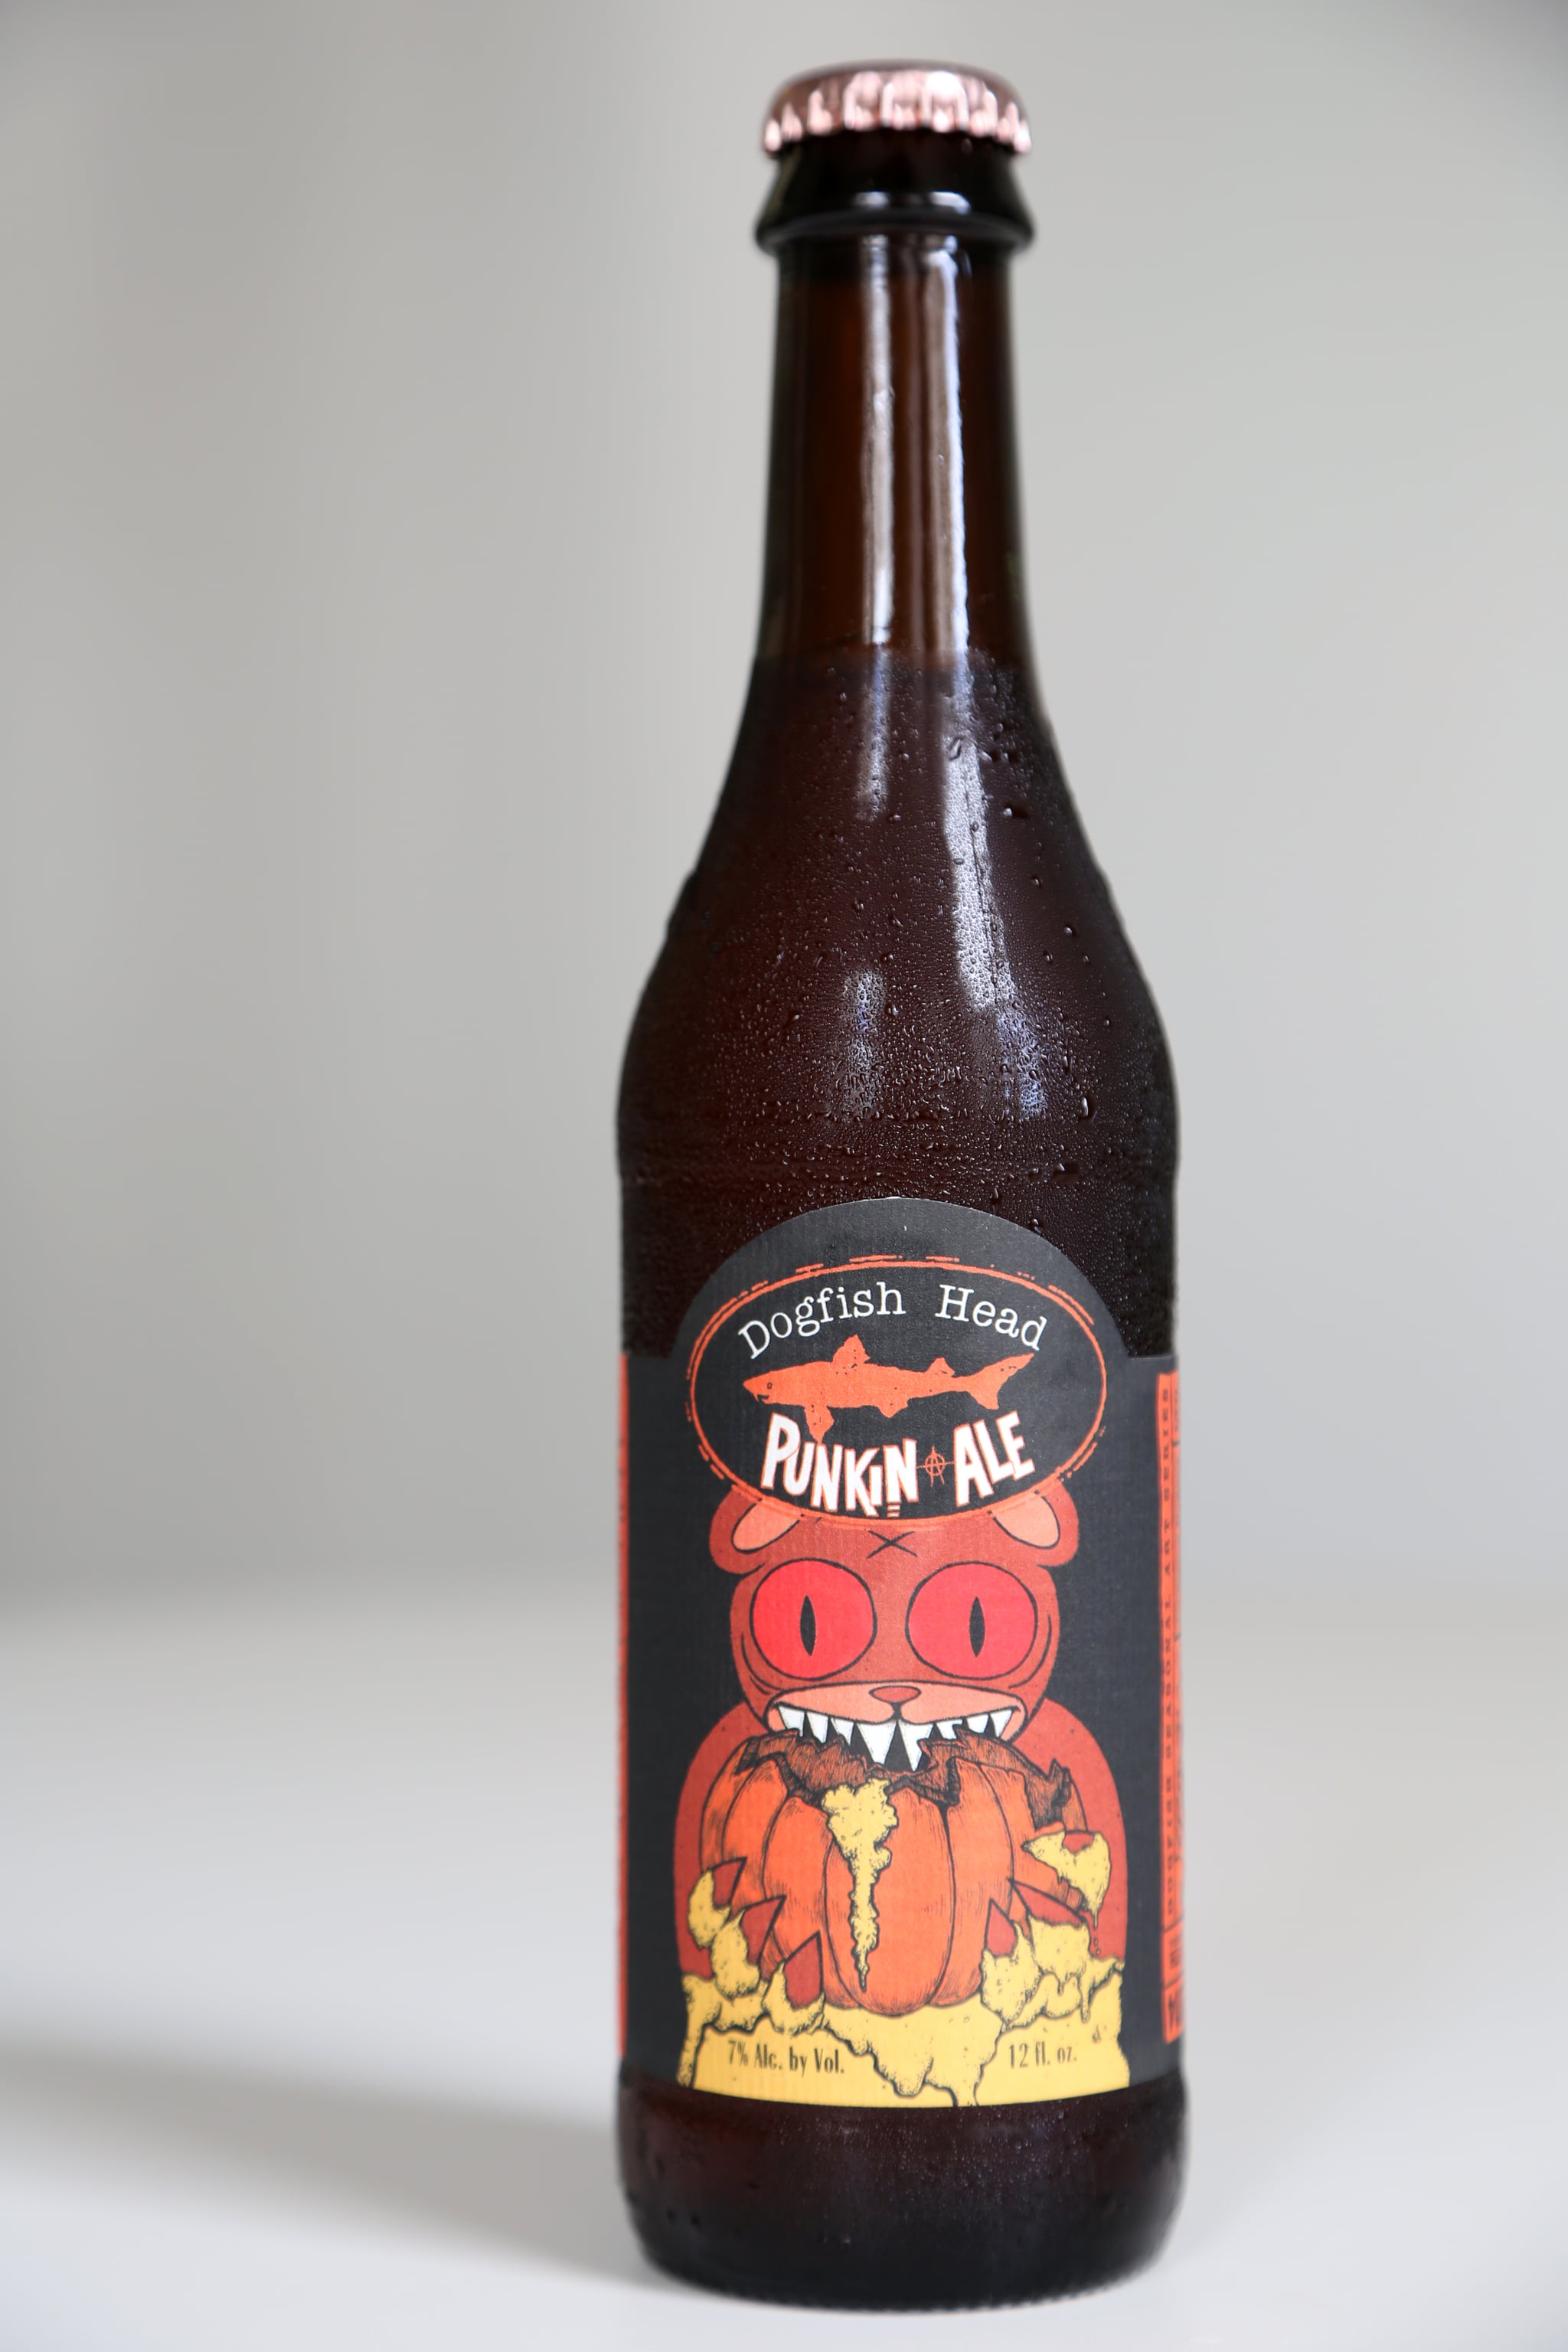 Dogfish Head Punkin Ale 80+ Pumpkin Spice Products, Ranked From Worst